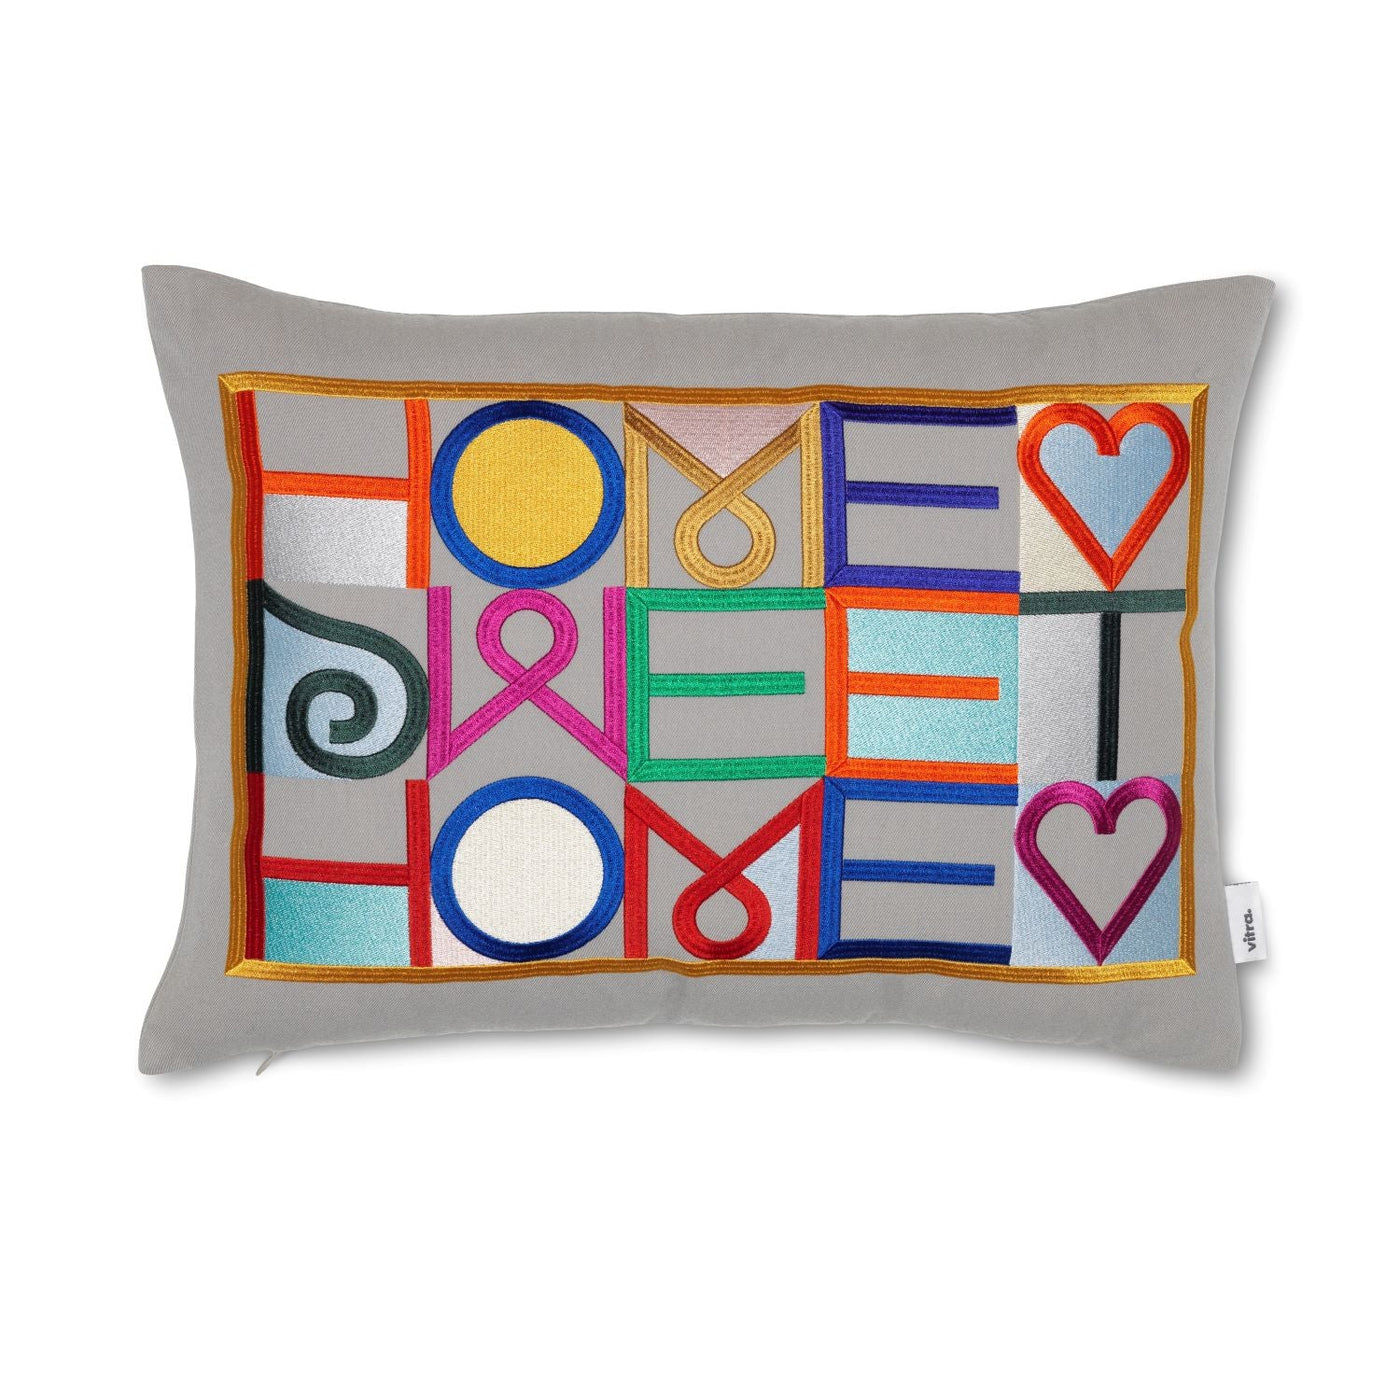 Embroidered Pillow, Home Sweet Home hellgrau - Vitra Design Museum Shop